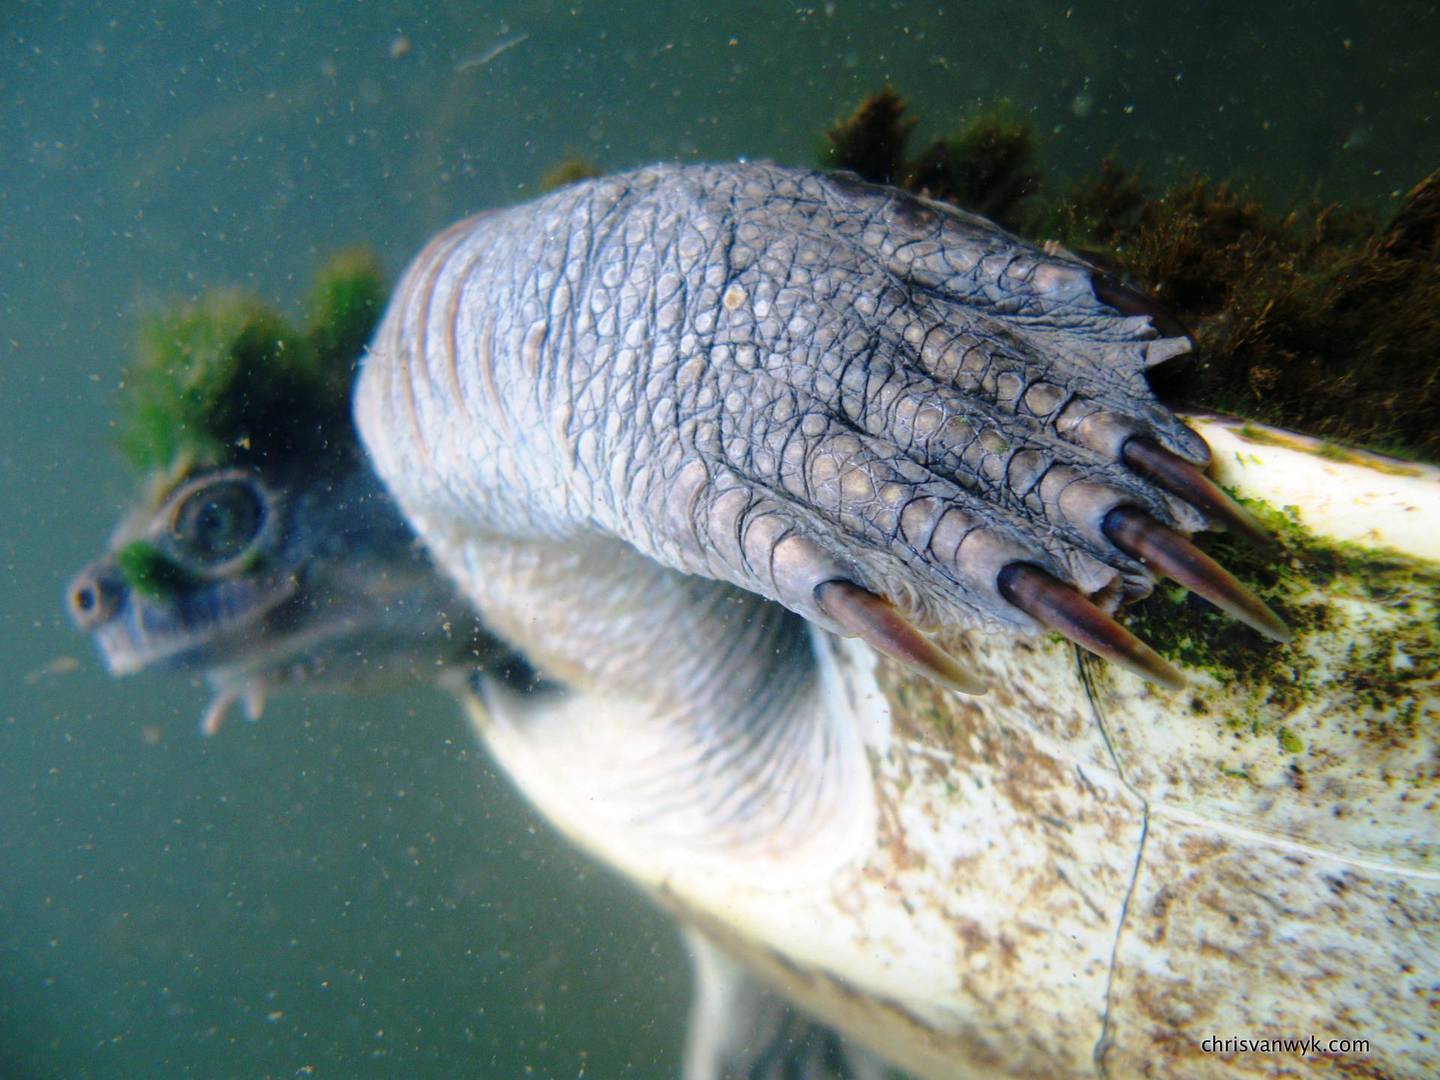 Mary River turtles were only discovered in 1990 and classified in 1994. Chris Van Wyk / @chrisvanwykdotcom